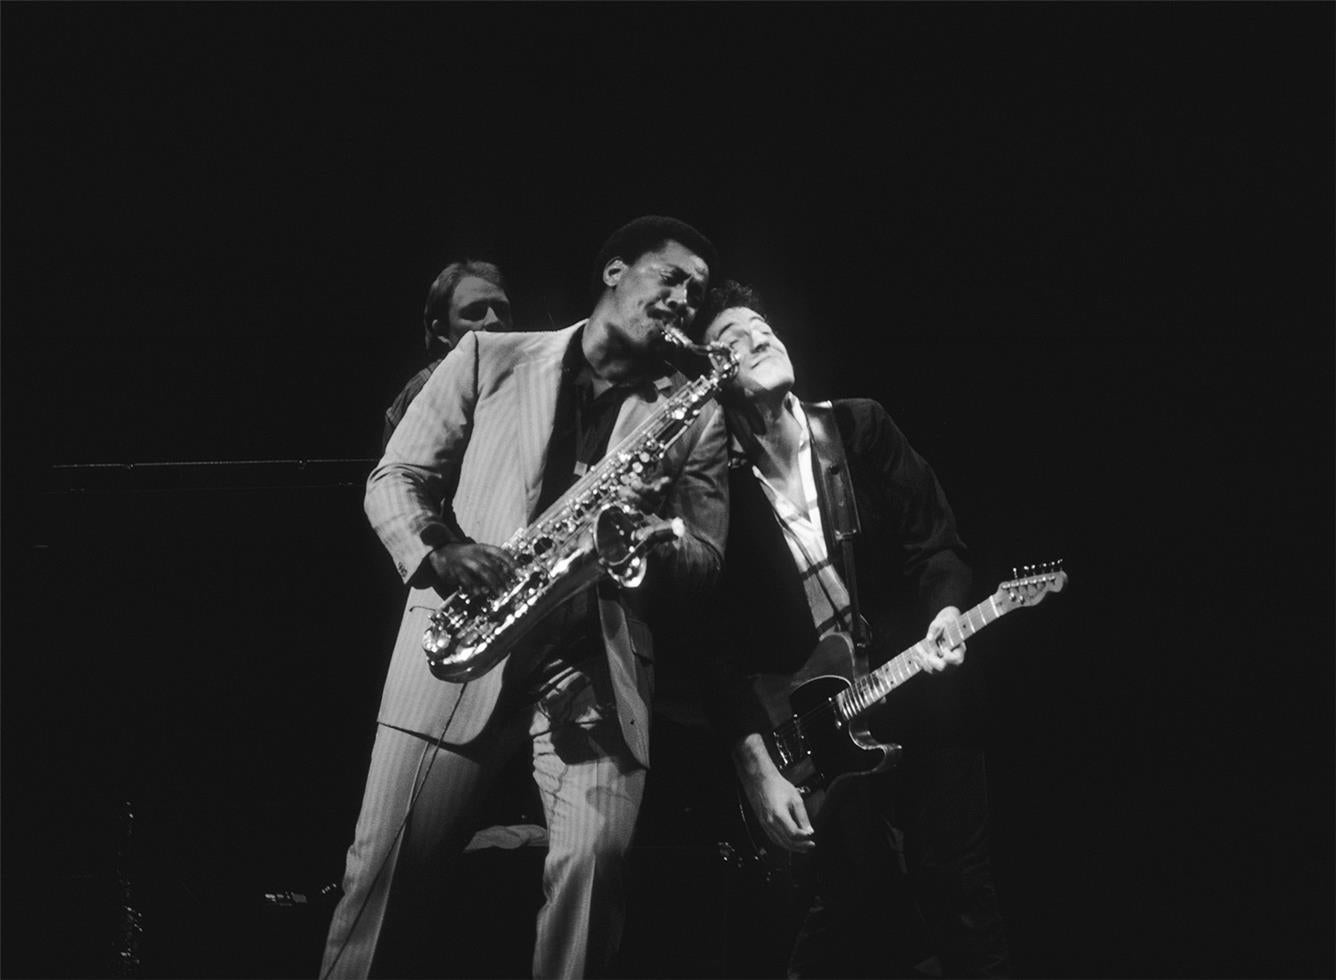  Charlyn Zlotnik Black and White Photograph - Clarence Clemons and Bruce Springsteen, E Street Band